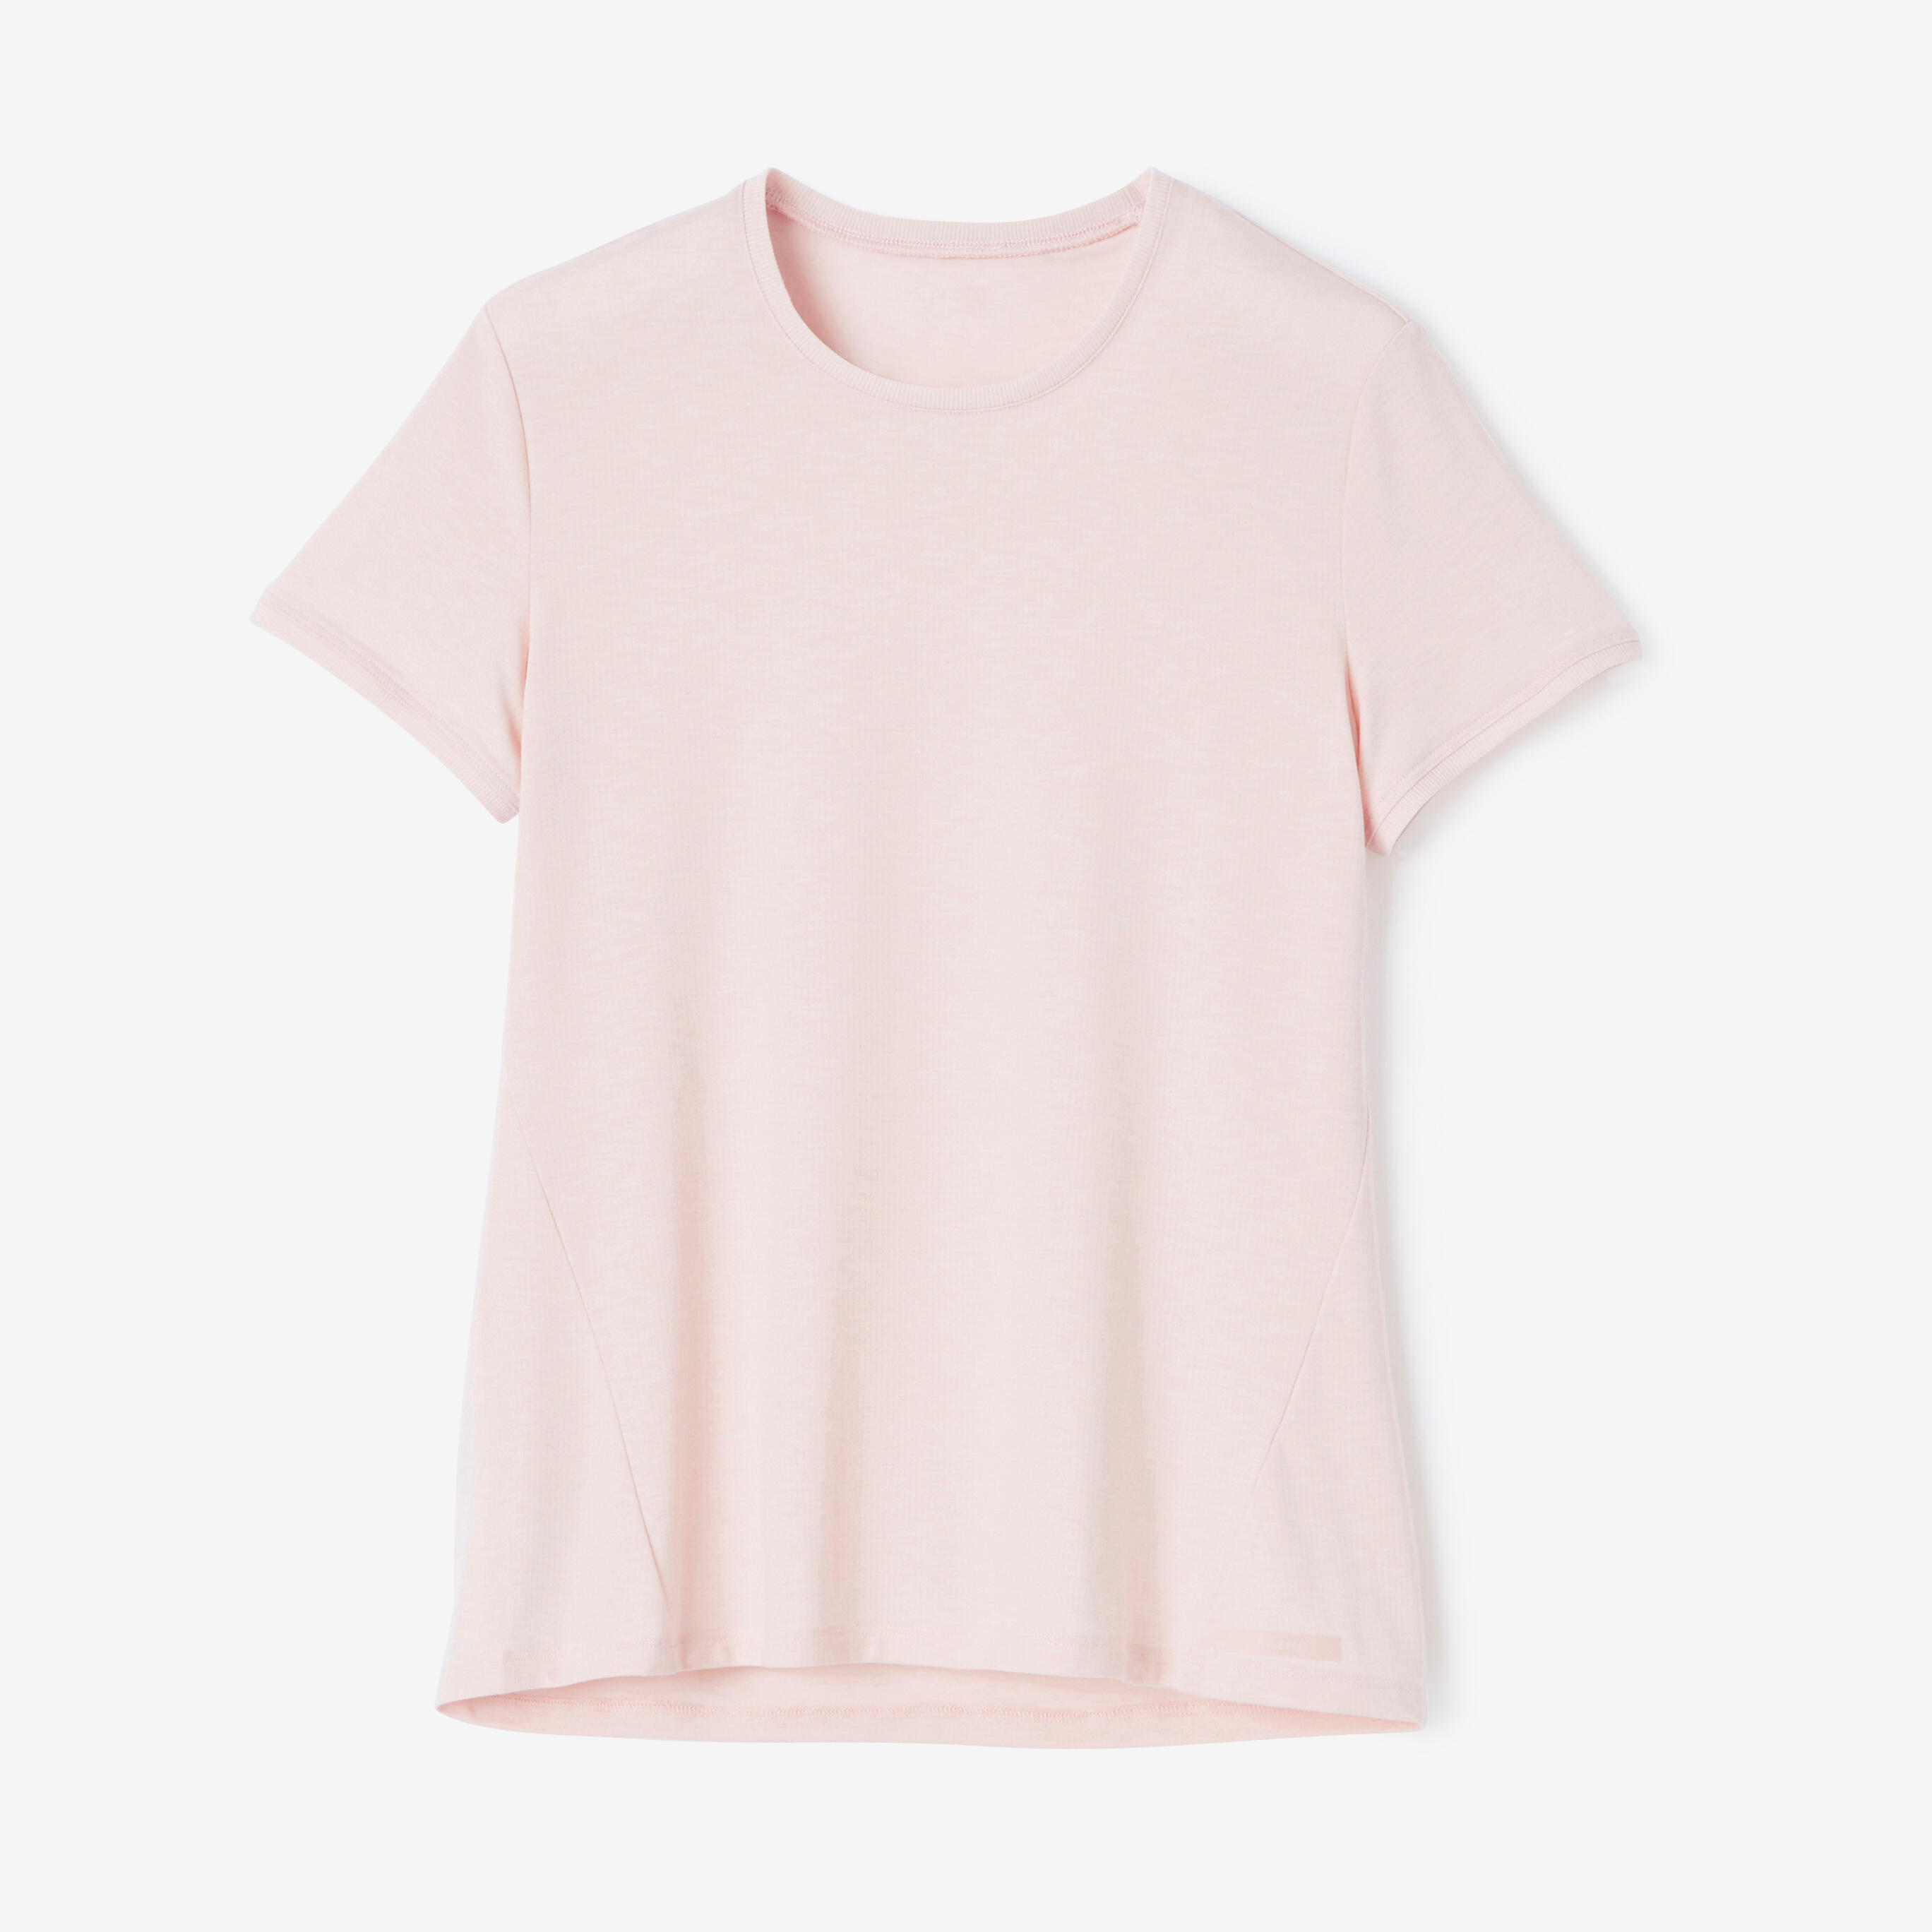 Soft and breathable women's running T-shirt - pink 7/8